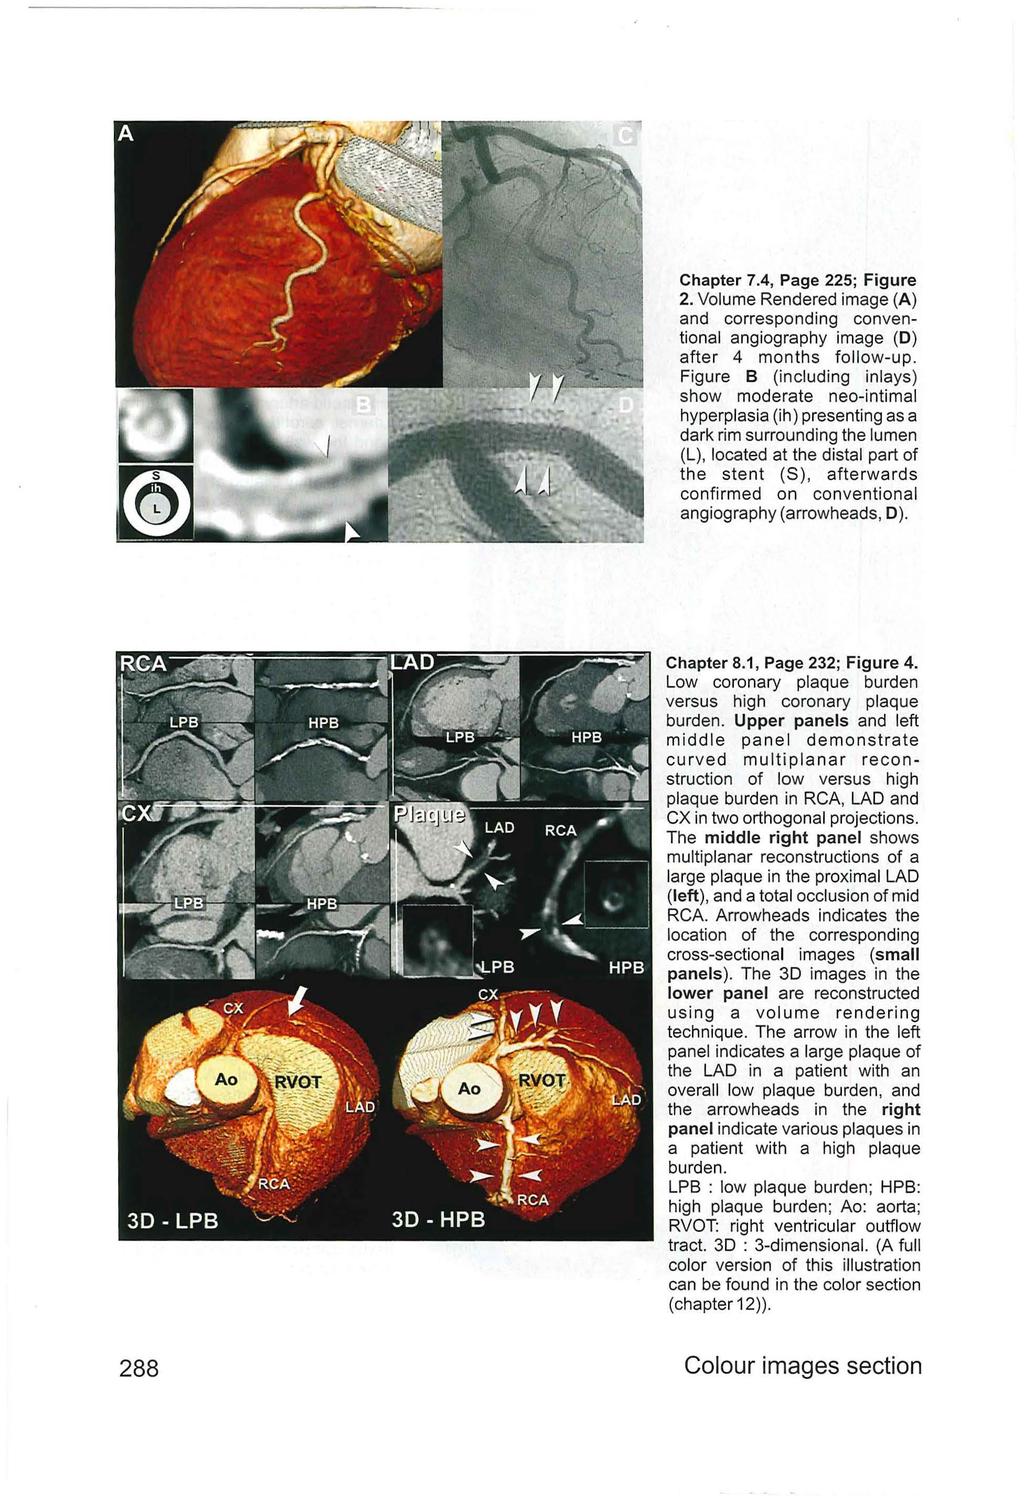 Chapter 7.4, Page 225; Figure 2. Volume Rendered image (A) and corresponding conventional angiography image (D) after 4 months follow-up.